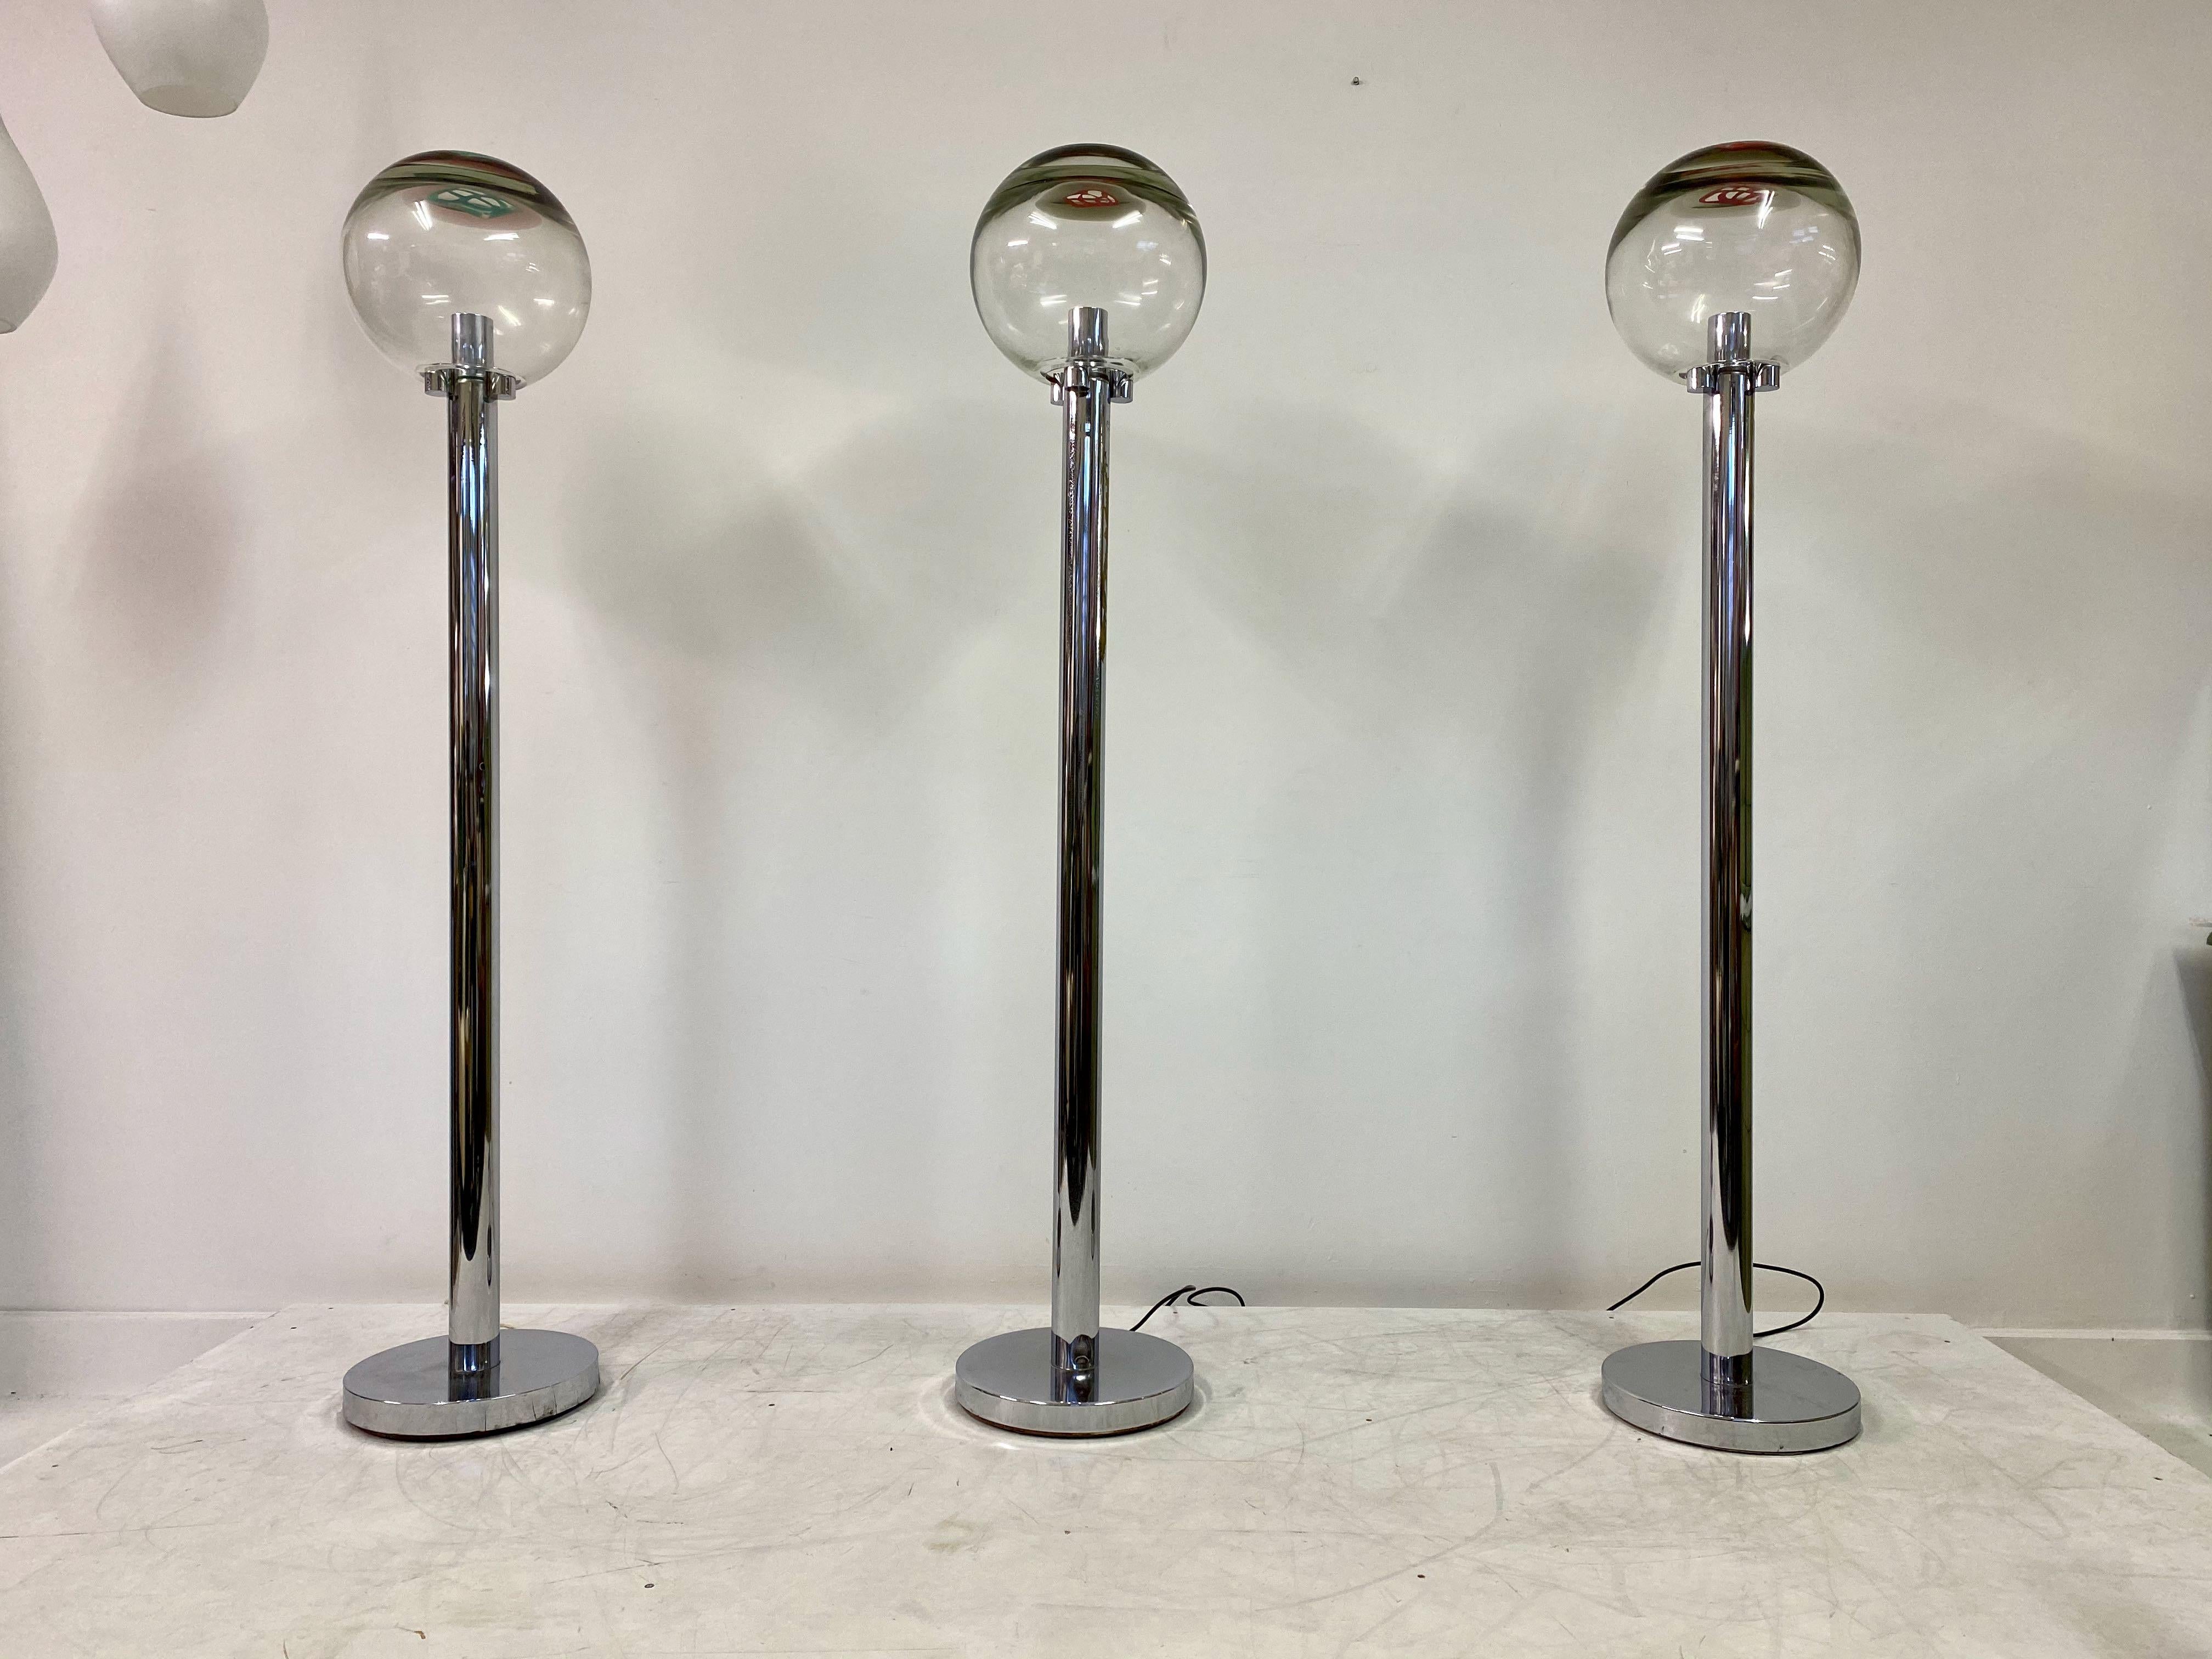 Pair of standard lamps (was a set of three but now one has been sold)

Grata by Ludovico Diaz de Santillana

Made by Venini, Murano

Murrine glass shades

Chromium-plated stems and base

1970s, Italy

Sold individually

Franco Deboni, Venini glass: